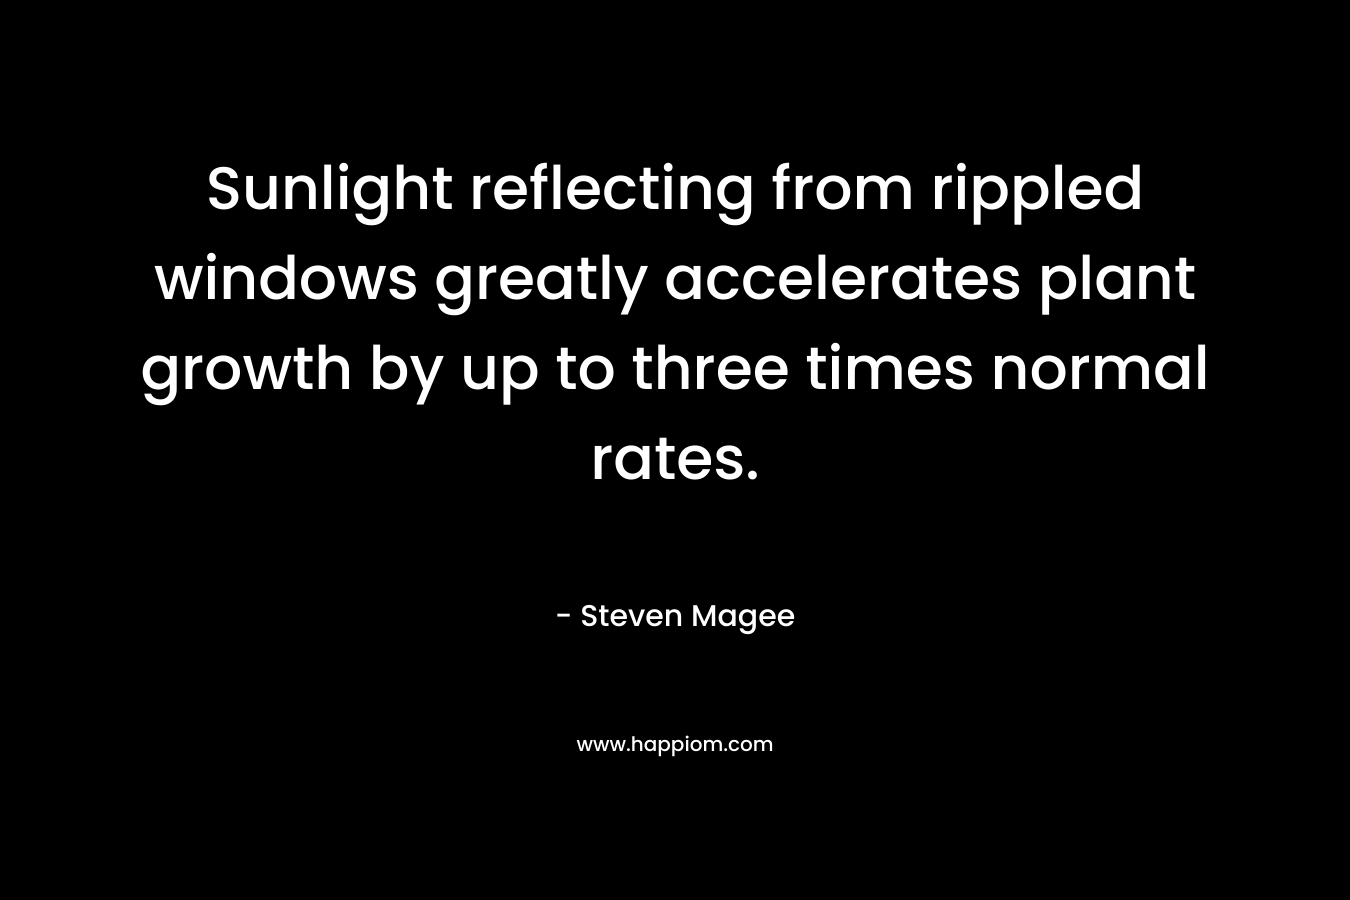 Sunlight reflecting from rippled windows greatly accelerates plant growth by up to three times normal rates. – Steven Magee